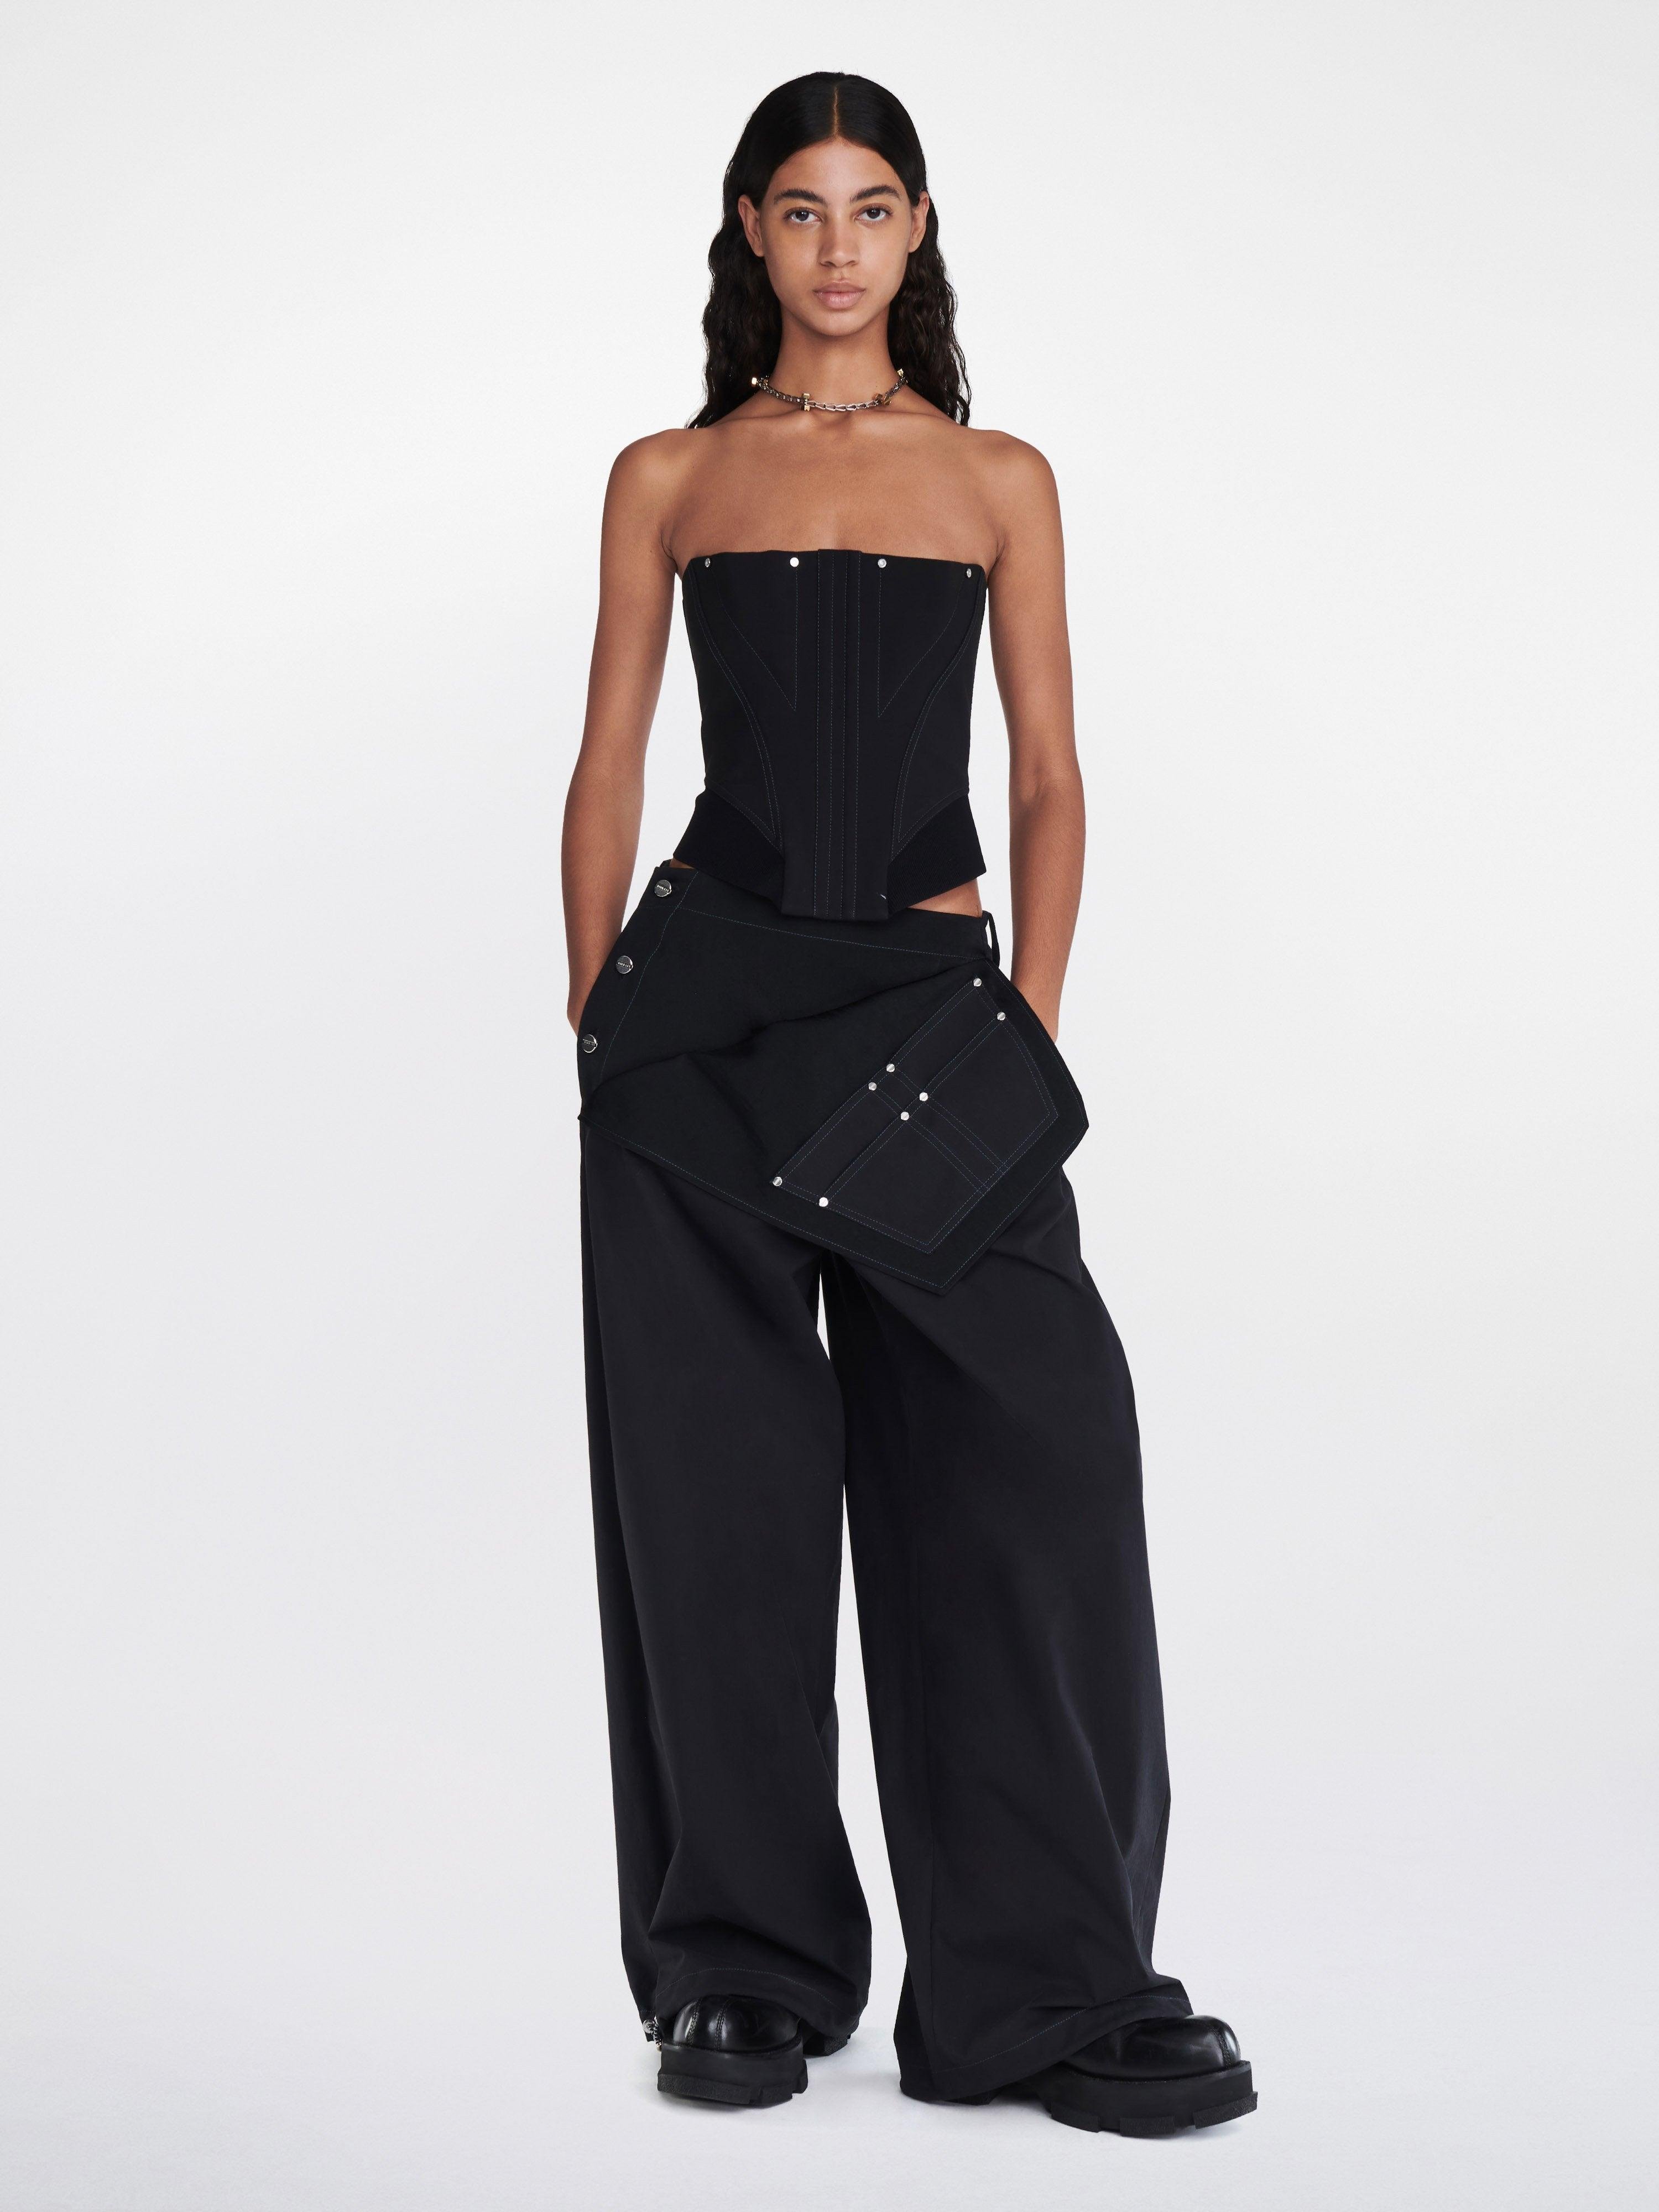 CONSTRUCT FEMME CORSET by DION LEE